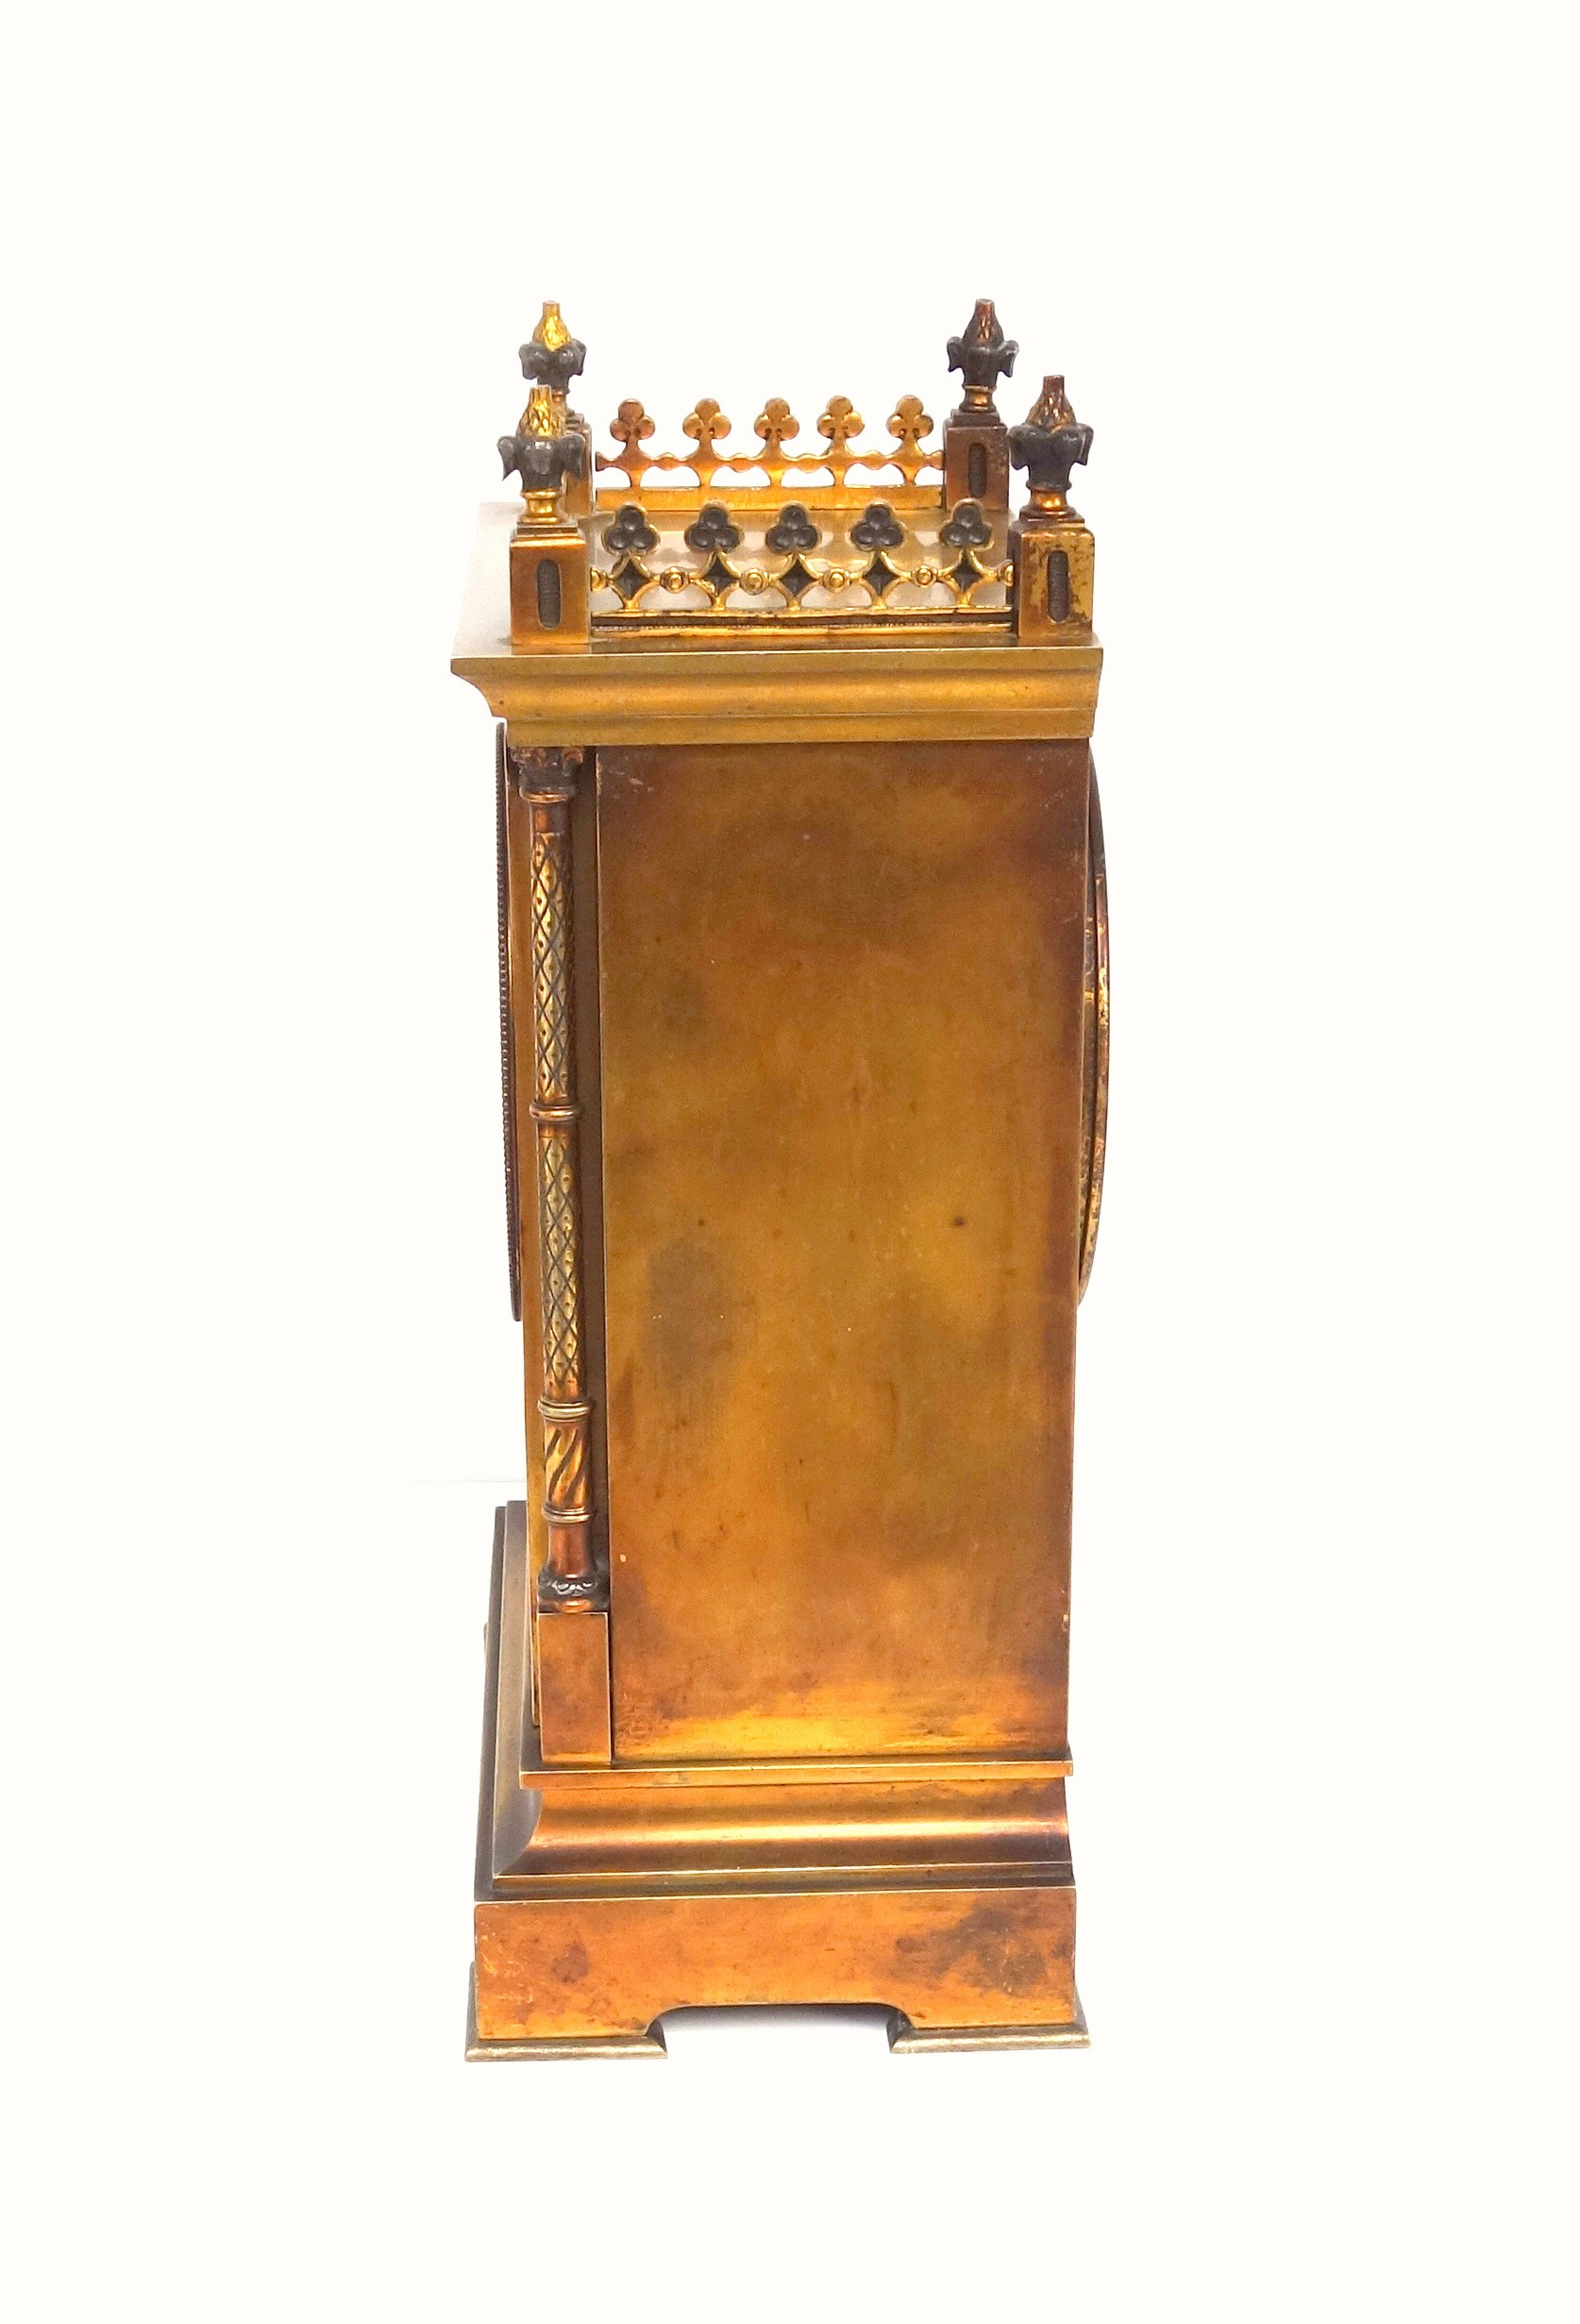 Late 19th Century fine French mantel clock with a gilt circular dial with black Roman numerals - Image 4 of 8